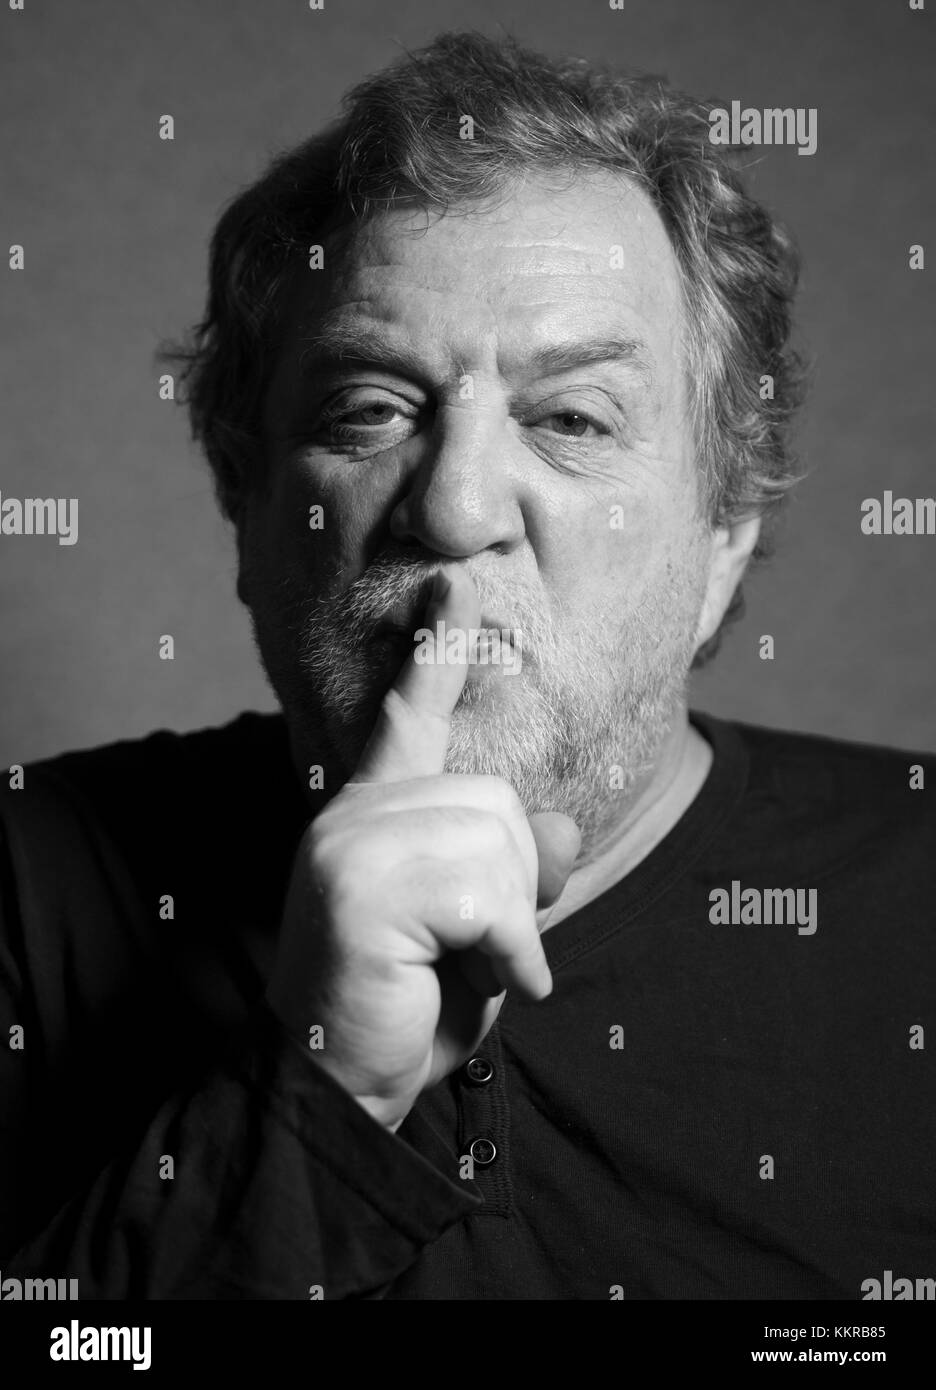 black and white portrait of middle aged caucasian man who put his index finger to his lips, calling for silence Stock Photo